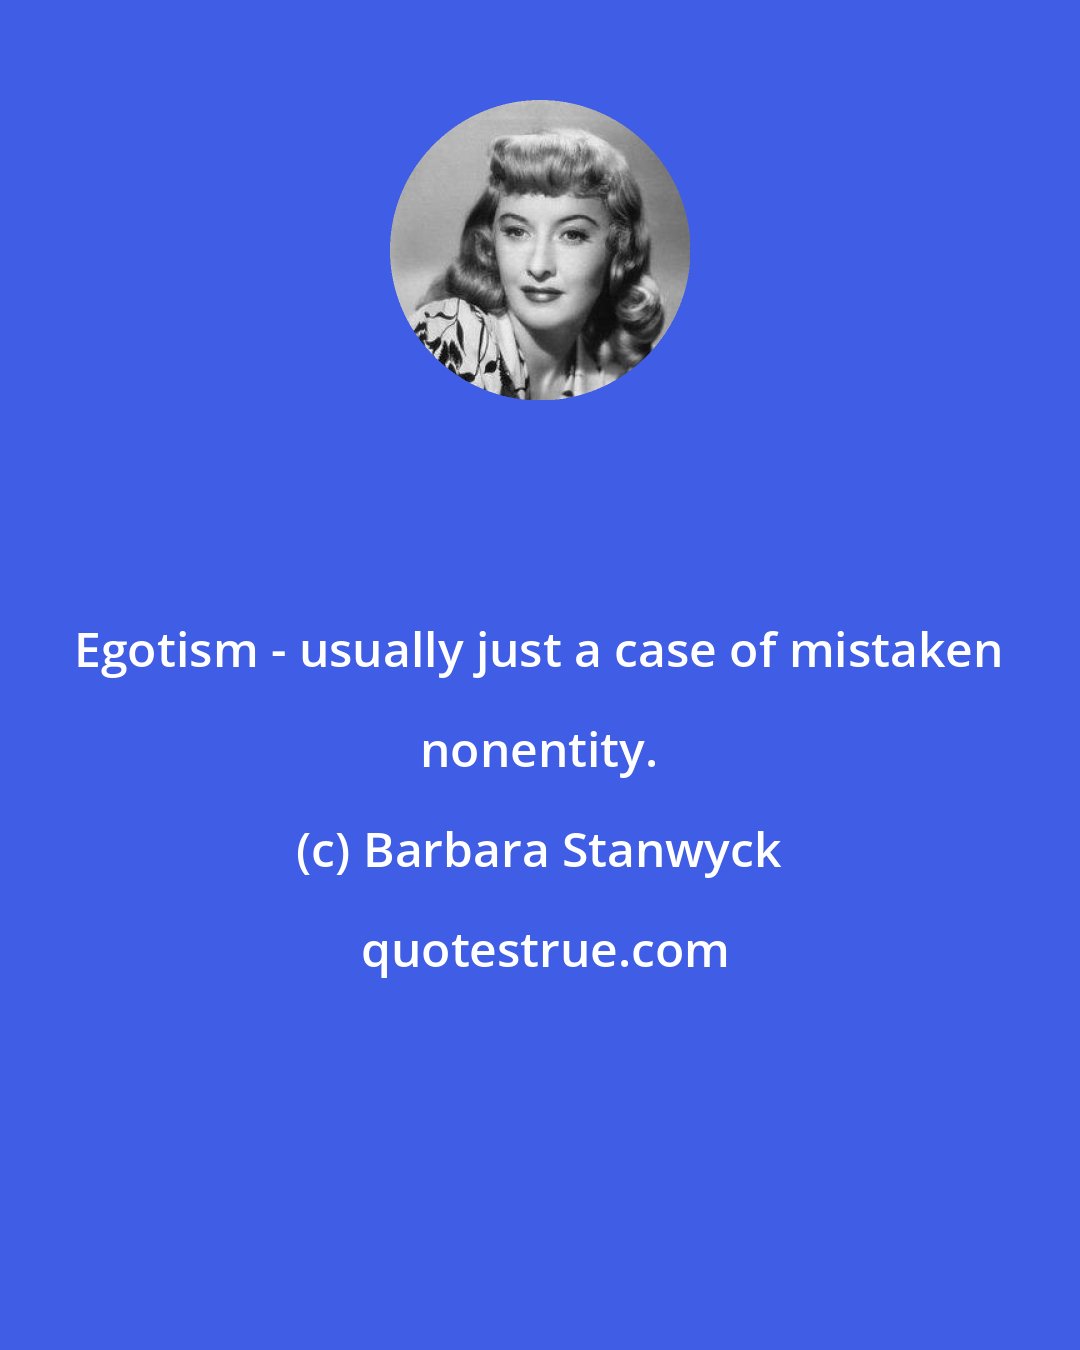 Barbara Stanwyck: Egotism - usually just a case of mistaken nonentity.